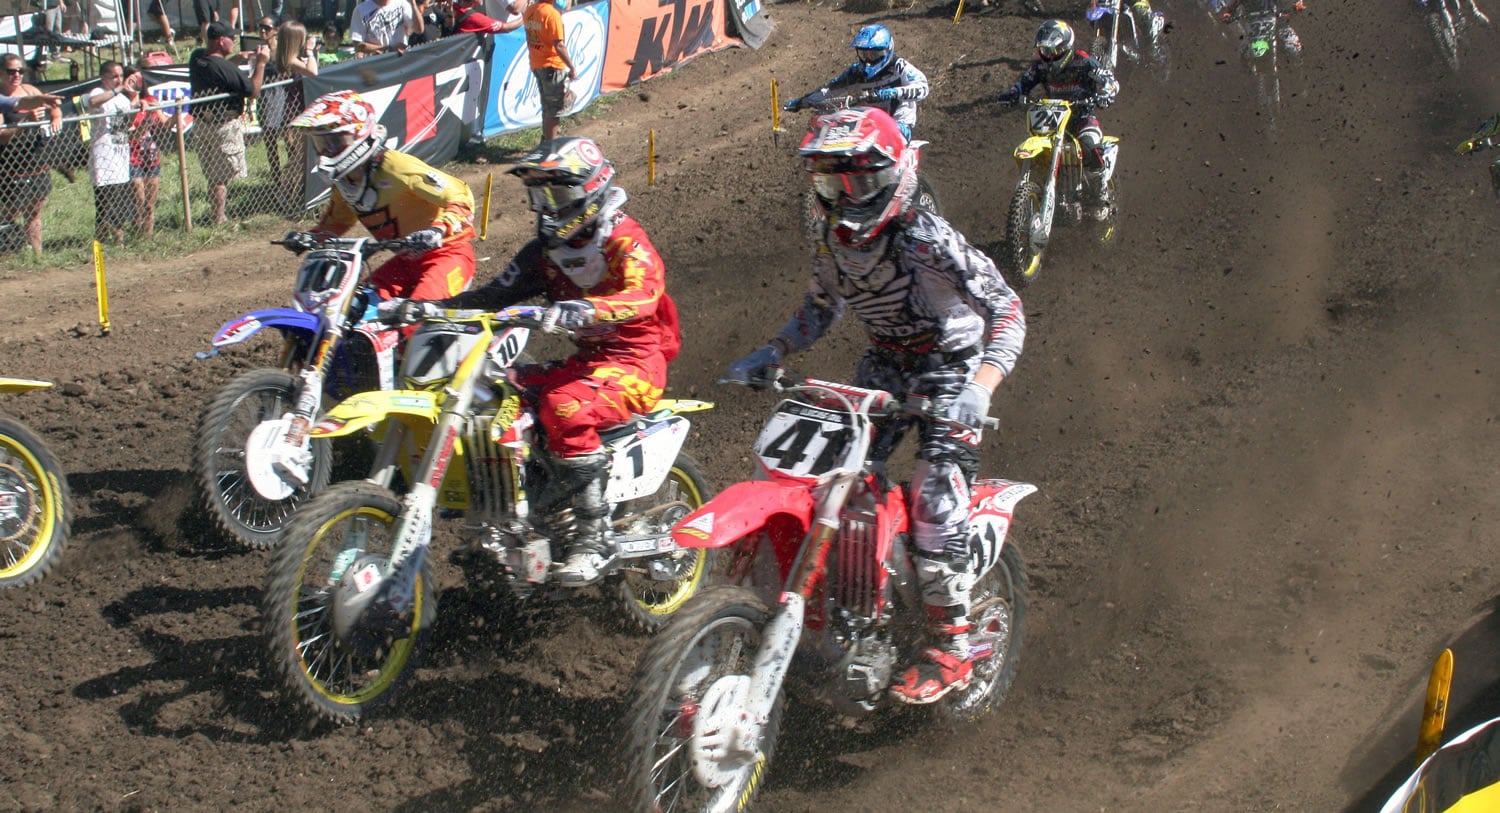 Tens of thousands of screaming racing fans huddled around the track Saturday, as Washougal Motocross Park went live on the SPEED network, at 4 p.m., for the eighth round of the 2011 Lucas Oil Motocross Championship Series.